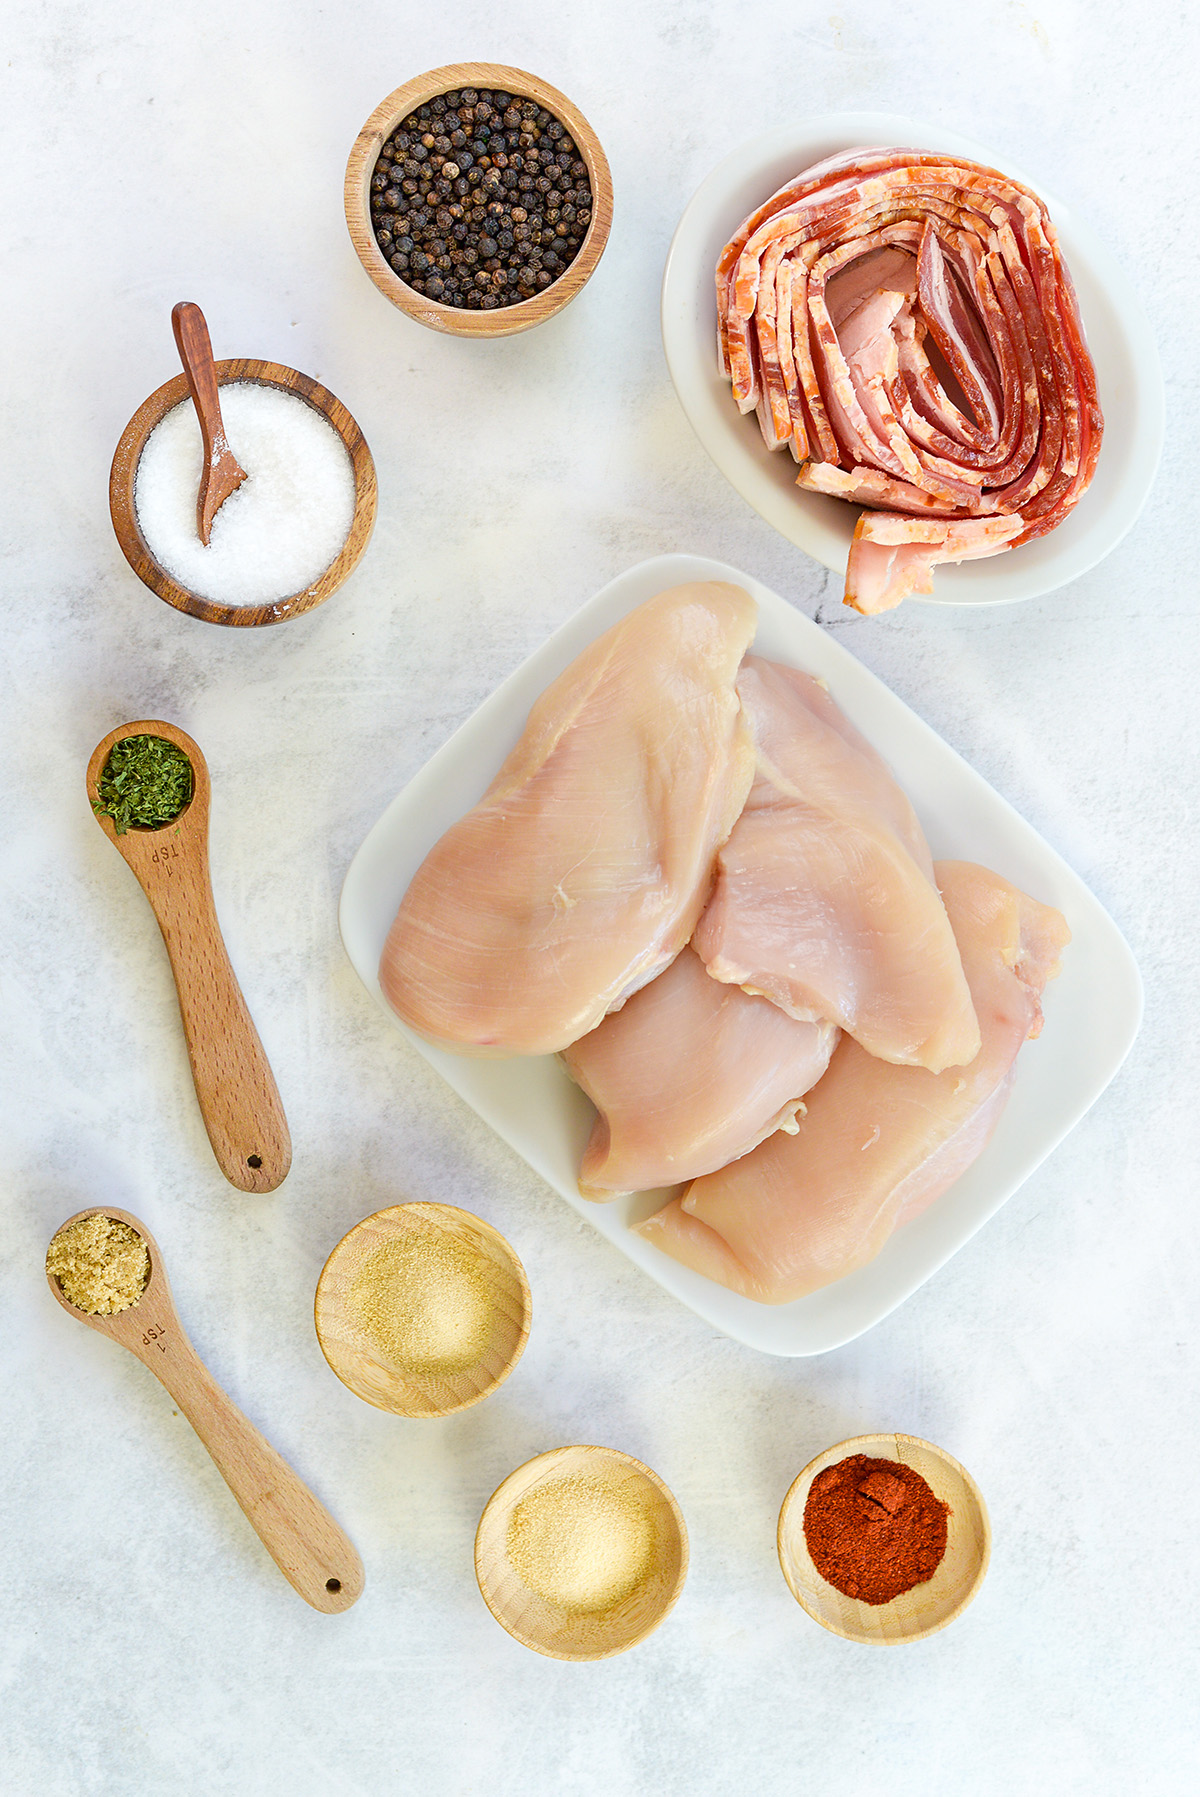 BAcon wrapped chicken ingredients spread out on a countertop.